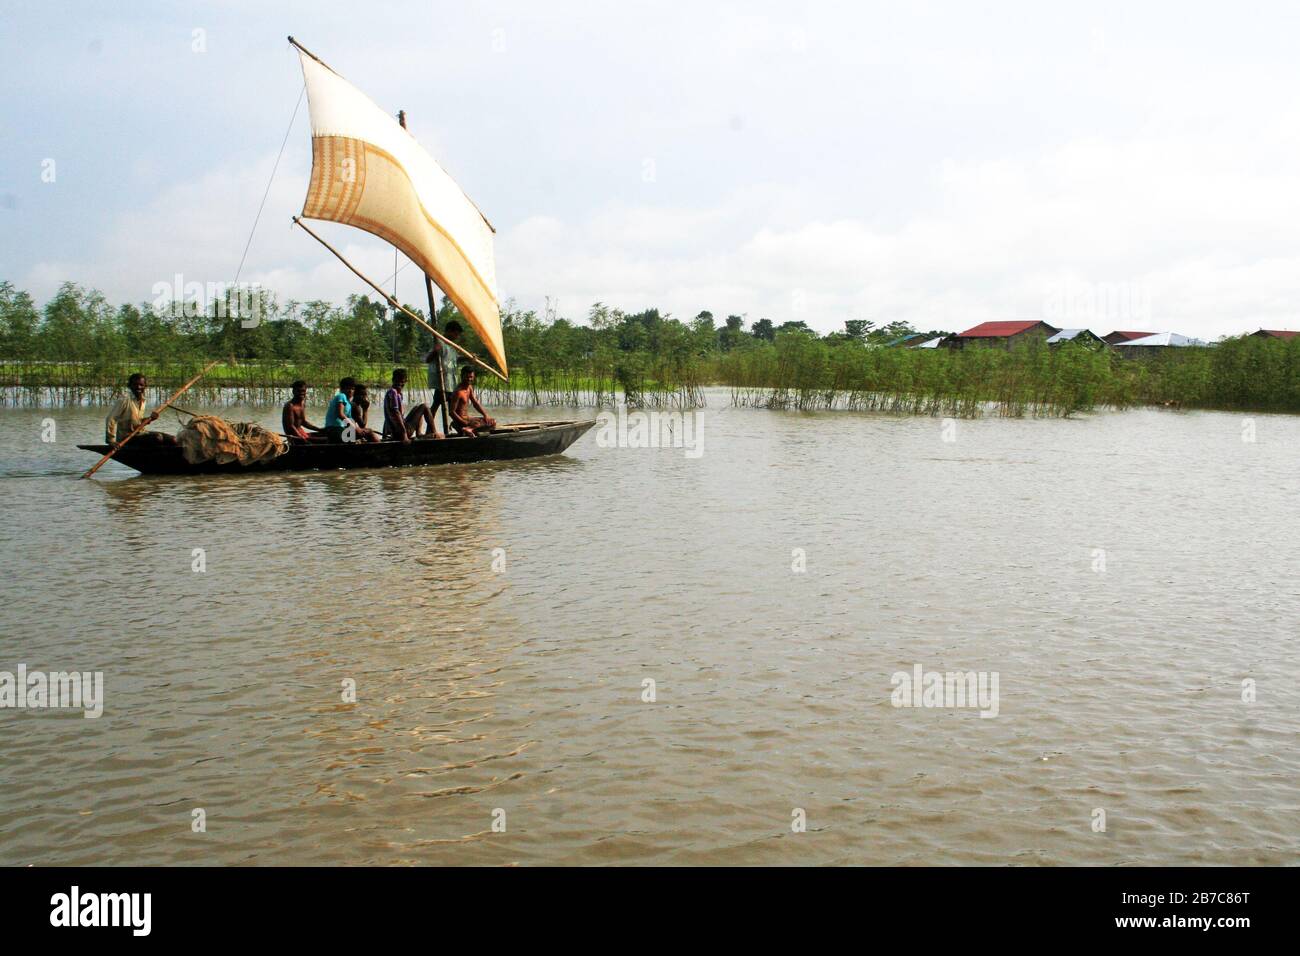 A traditional boat with sail in brahmaputra river in Gaibandha, Bangladesh.  Due to improved mechanical system, manual boat is very rare. Stock Photo